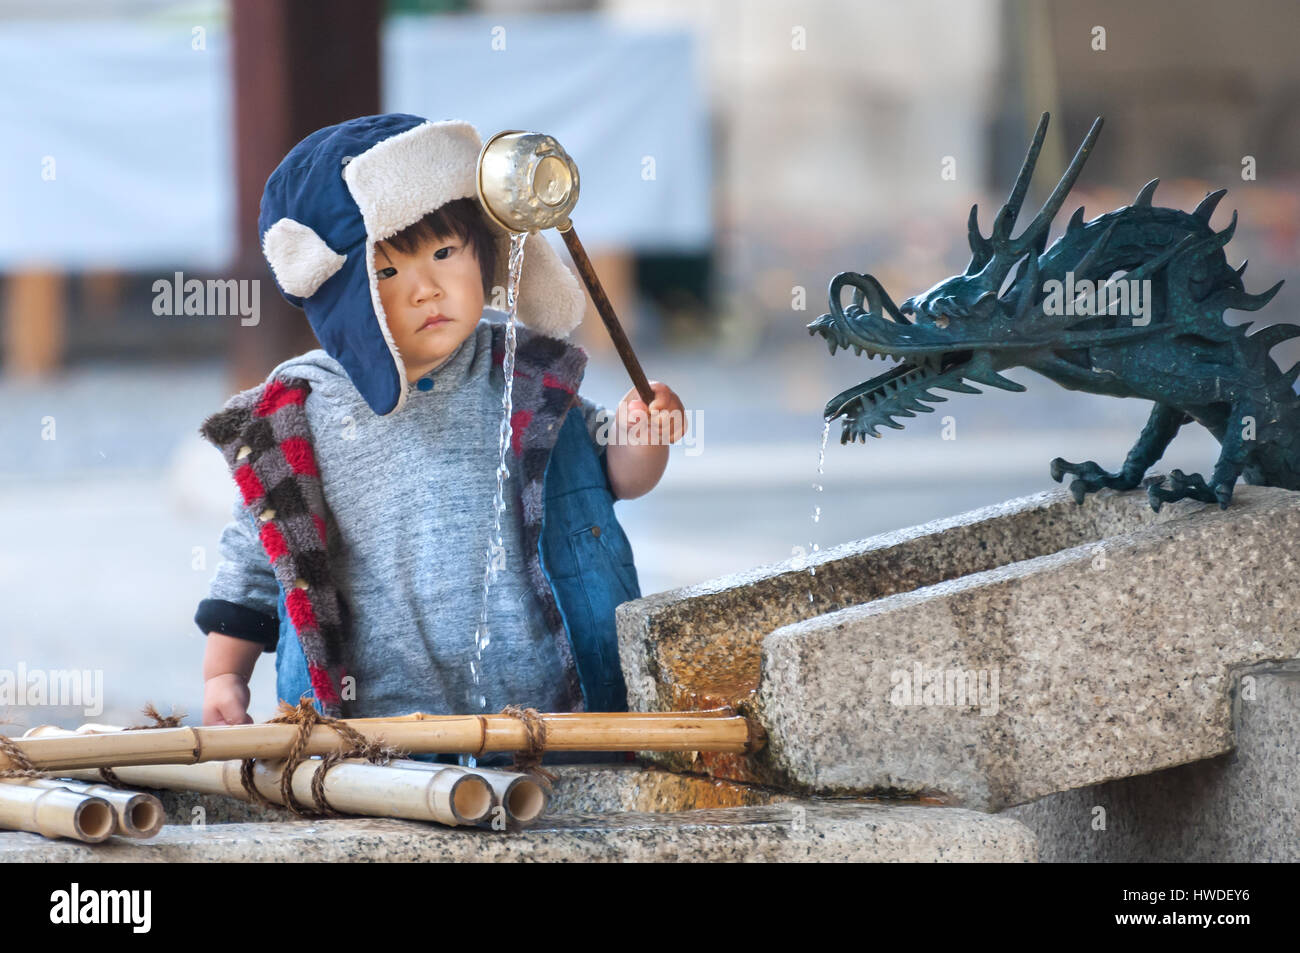 KYOTO, JAPAN - NOV 2016 - A young boy scoops water out of a purification fountain at a temple in Kyoto, Japan Stock Photo